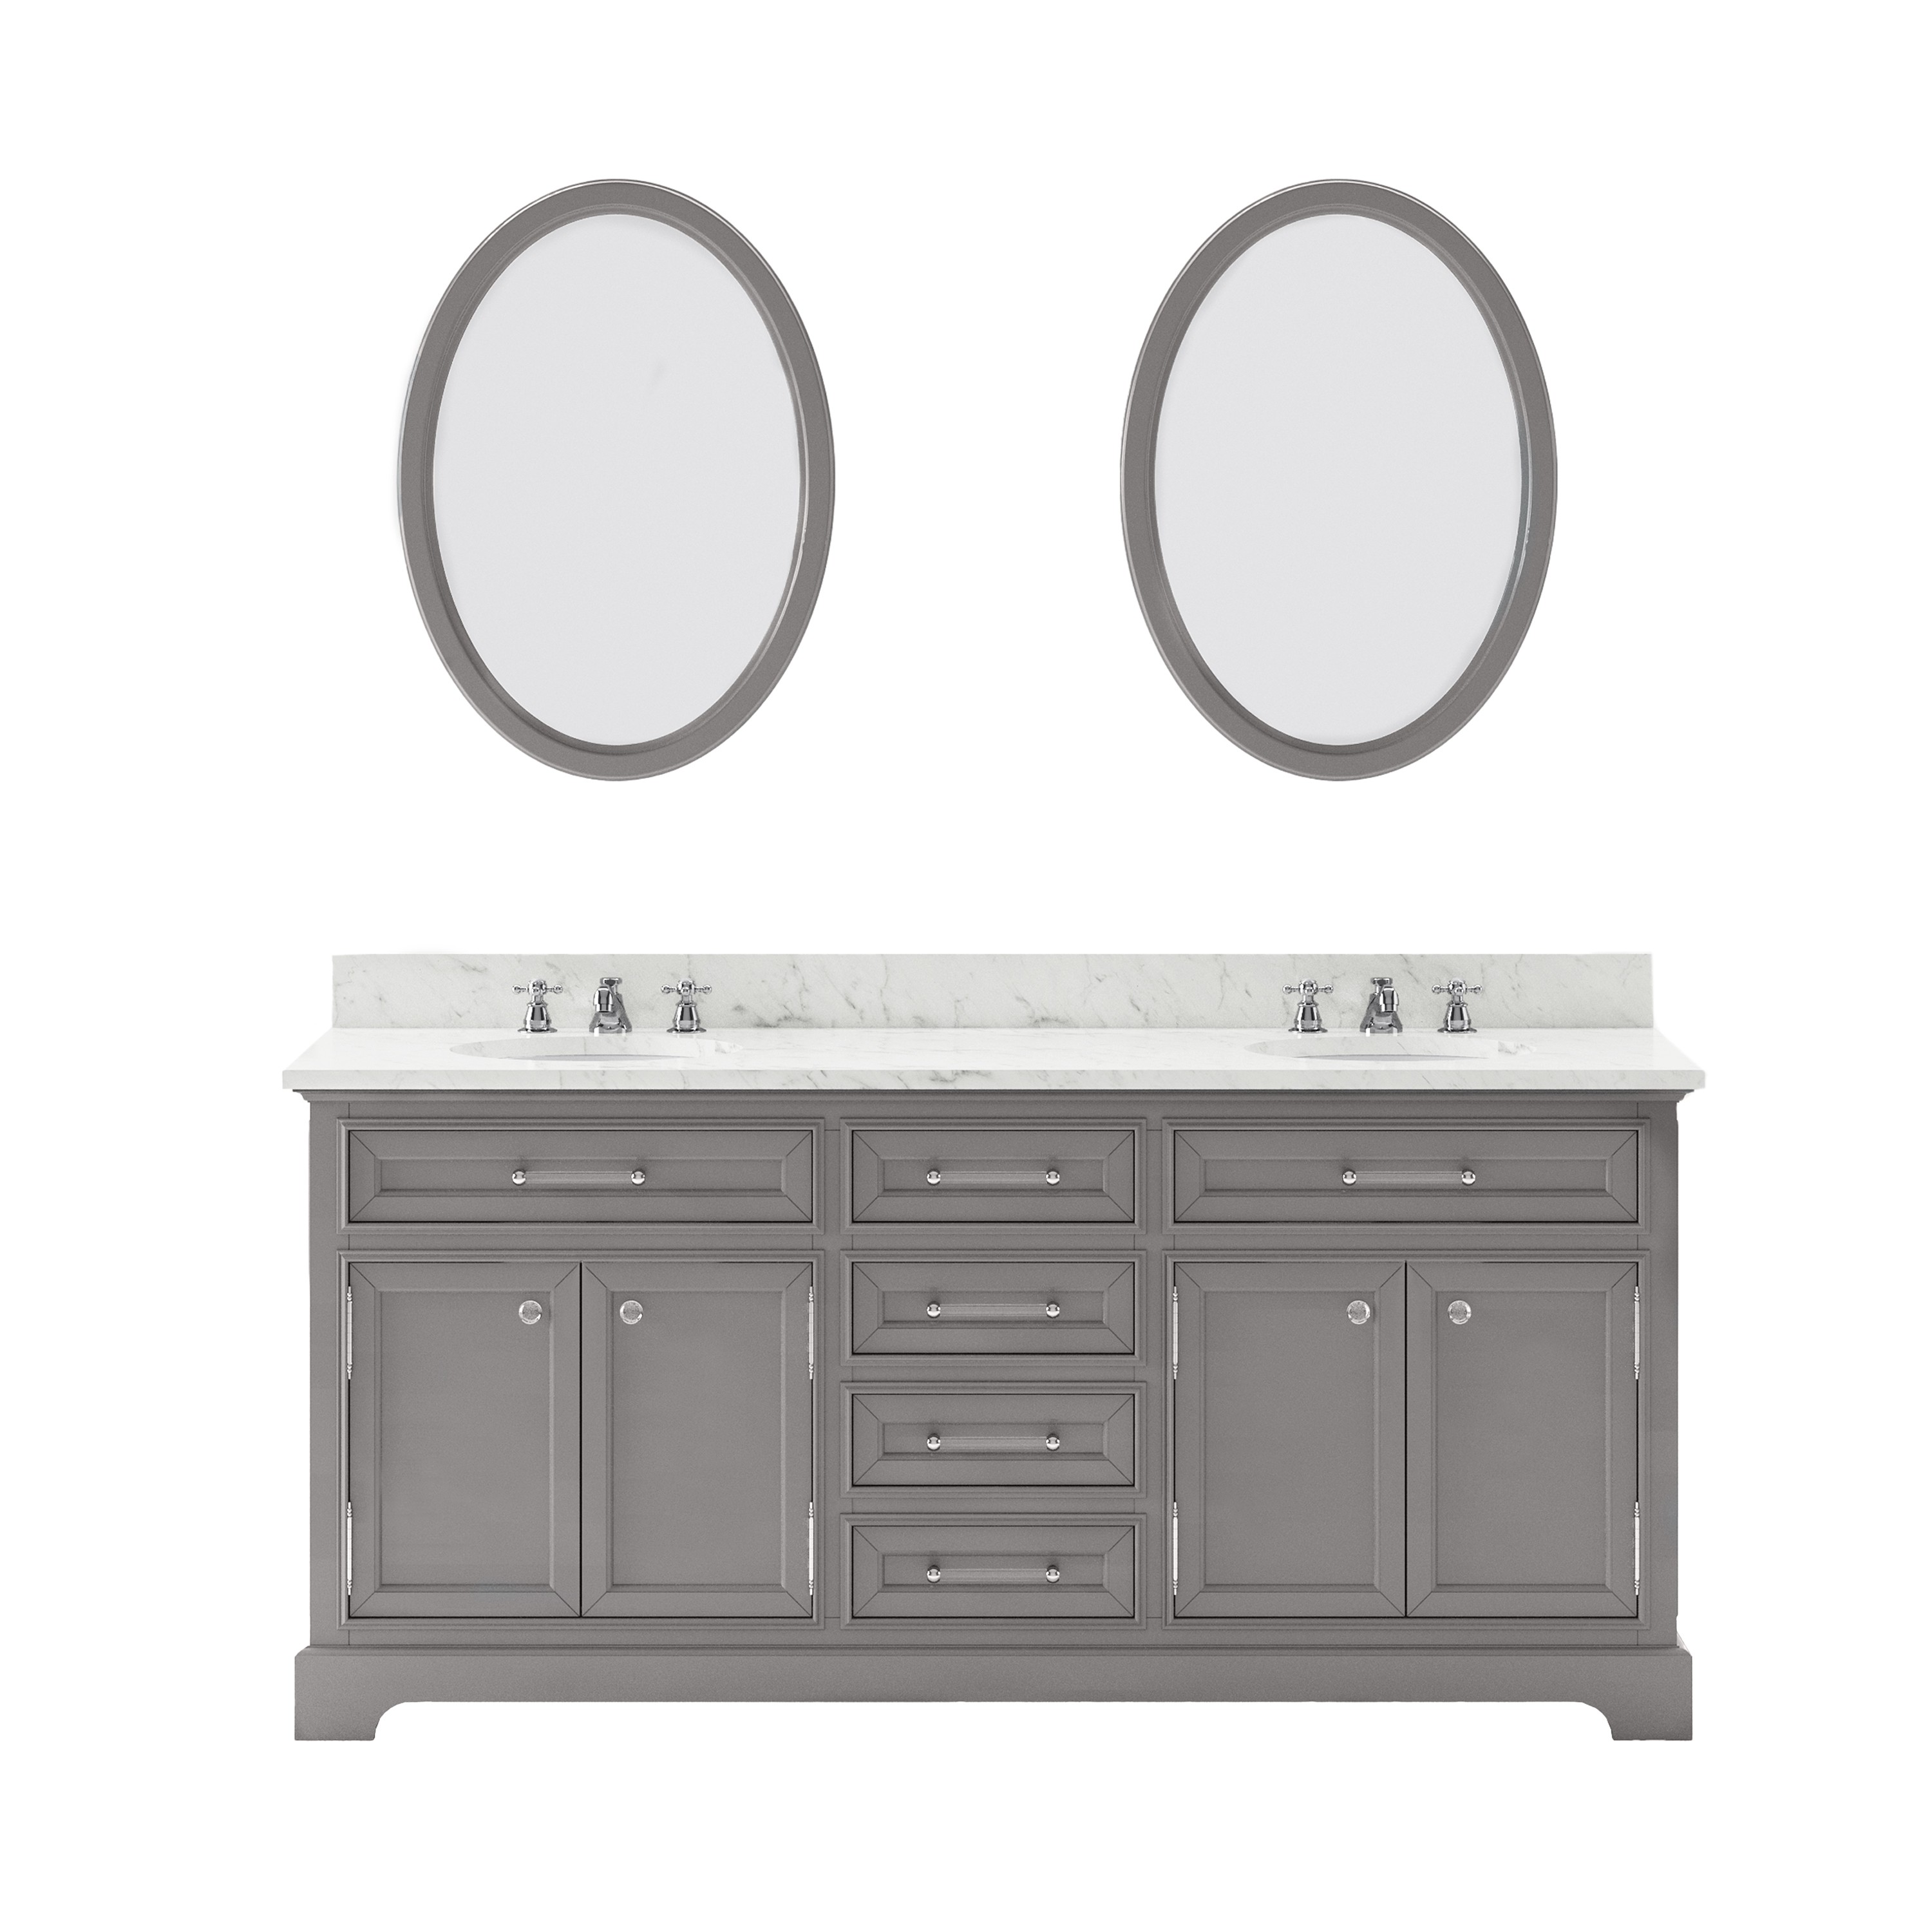 WATER-CREATION DE72CW01CG-O24000000 DERBY 72 INCH CASHMERE GREY DOUBLE SINK BATHROOM VANITY WITH 2 MATCHING FRAMED MIRRORS